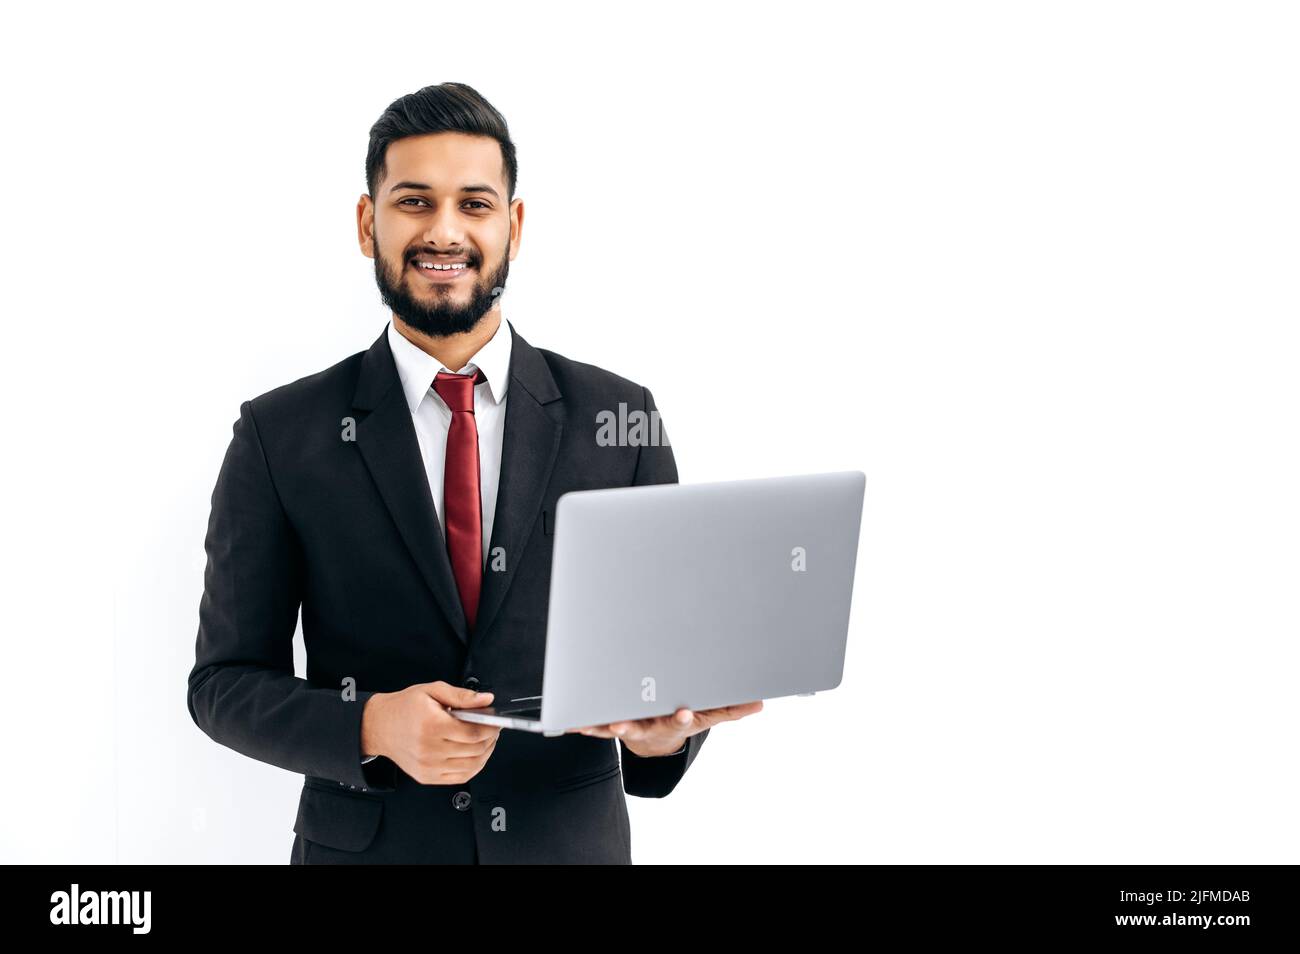 Successful handsome indian or arabian man in business suit, male entrepreneur, holding open laptop in hands, looks at camera, standing over isolated white background, smiles friendly. Copy-space Stock Photo